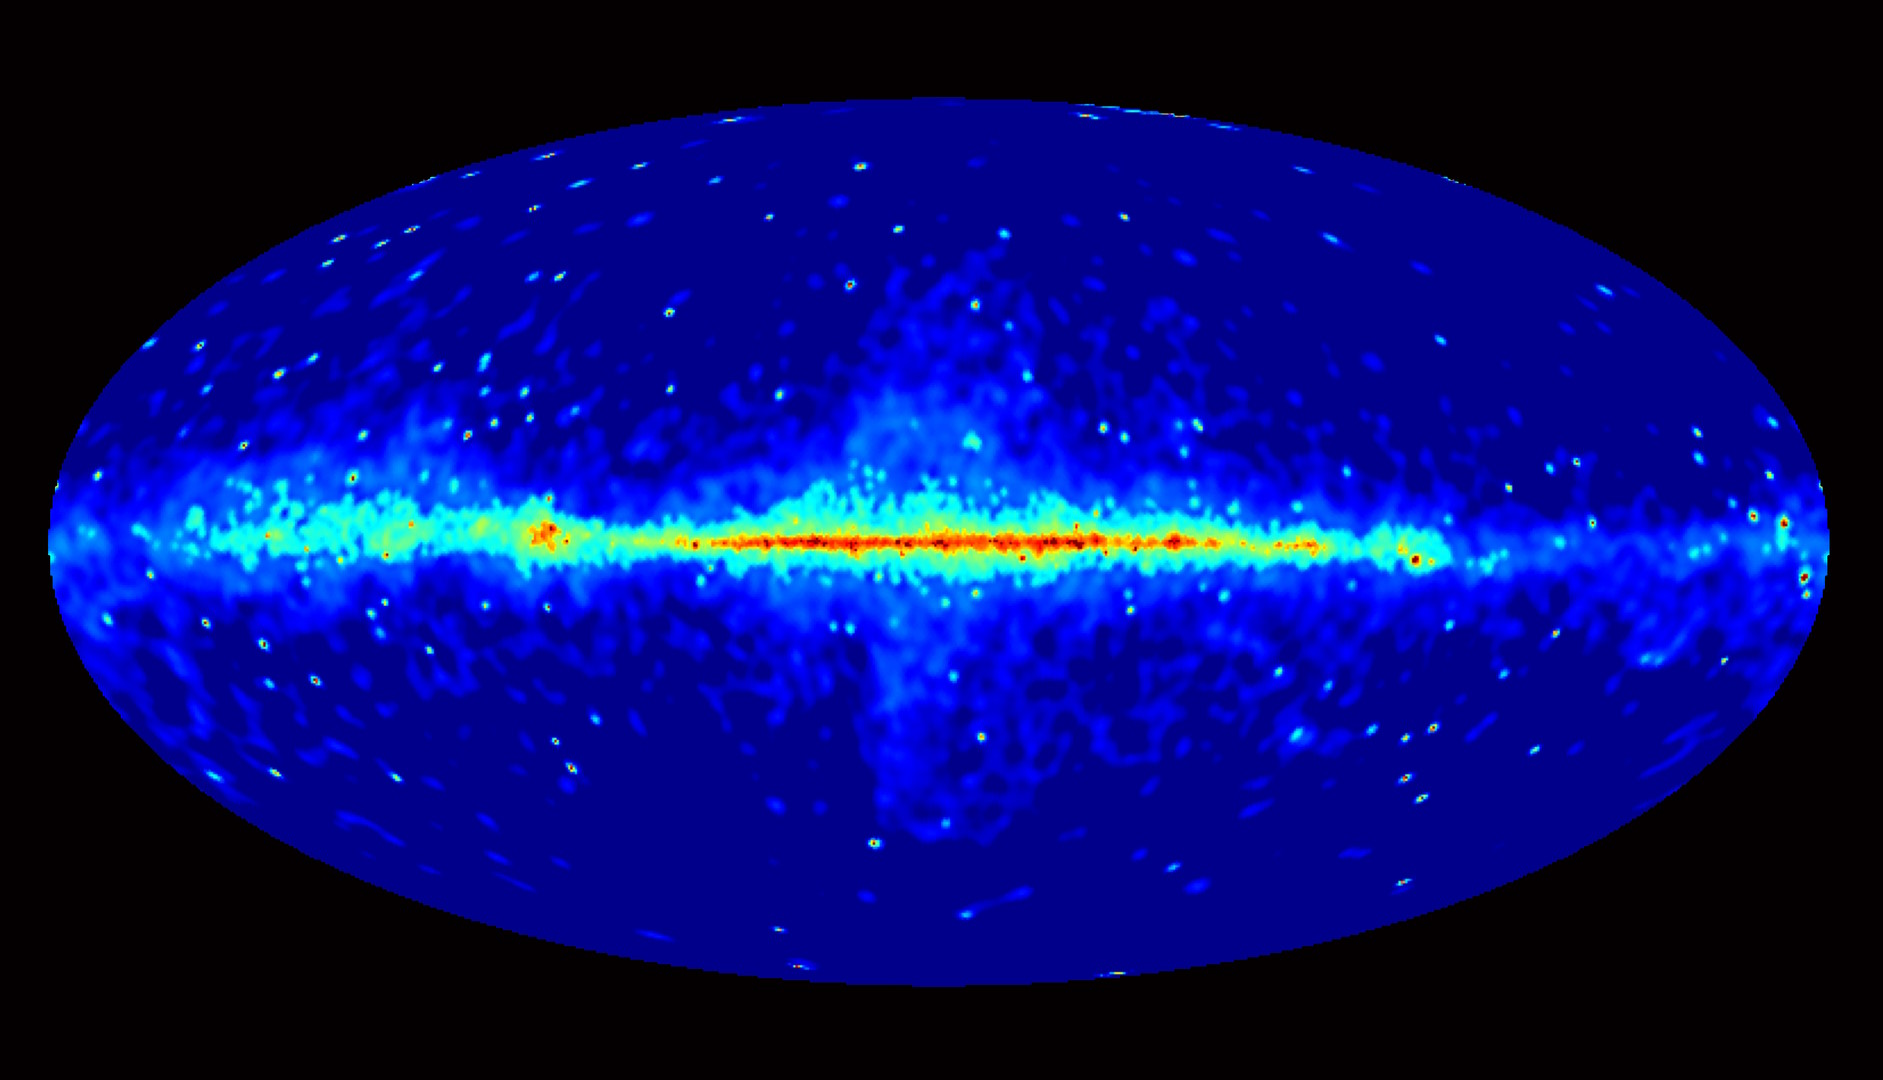 Fermi all-sky gamma-ray map at energies above 10 GeV